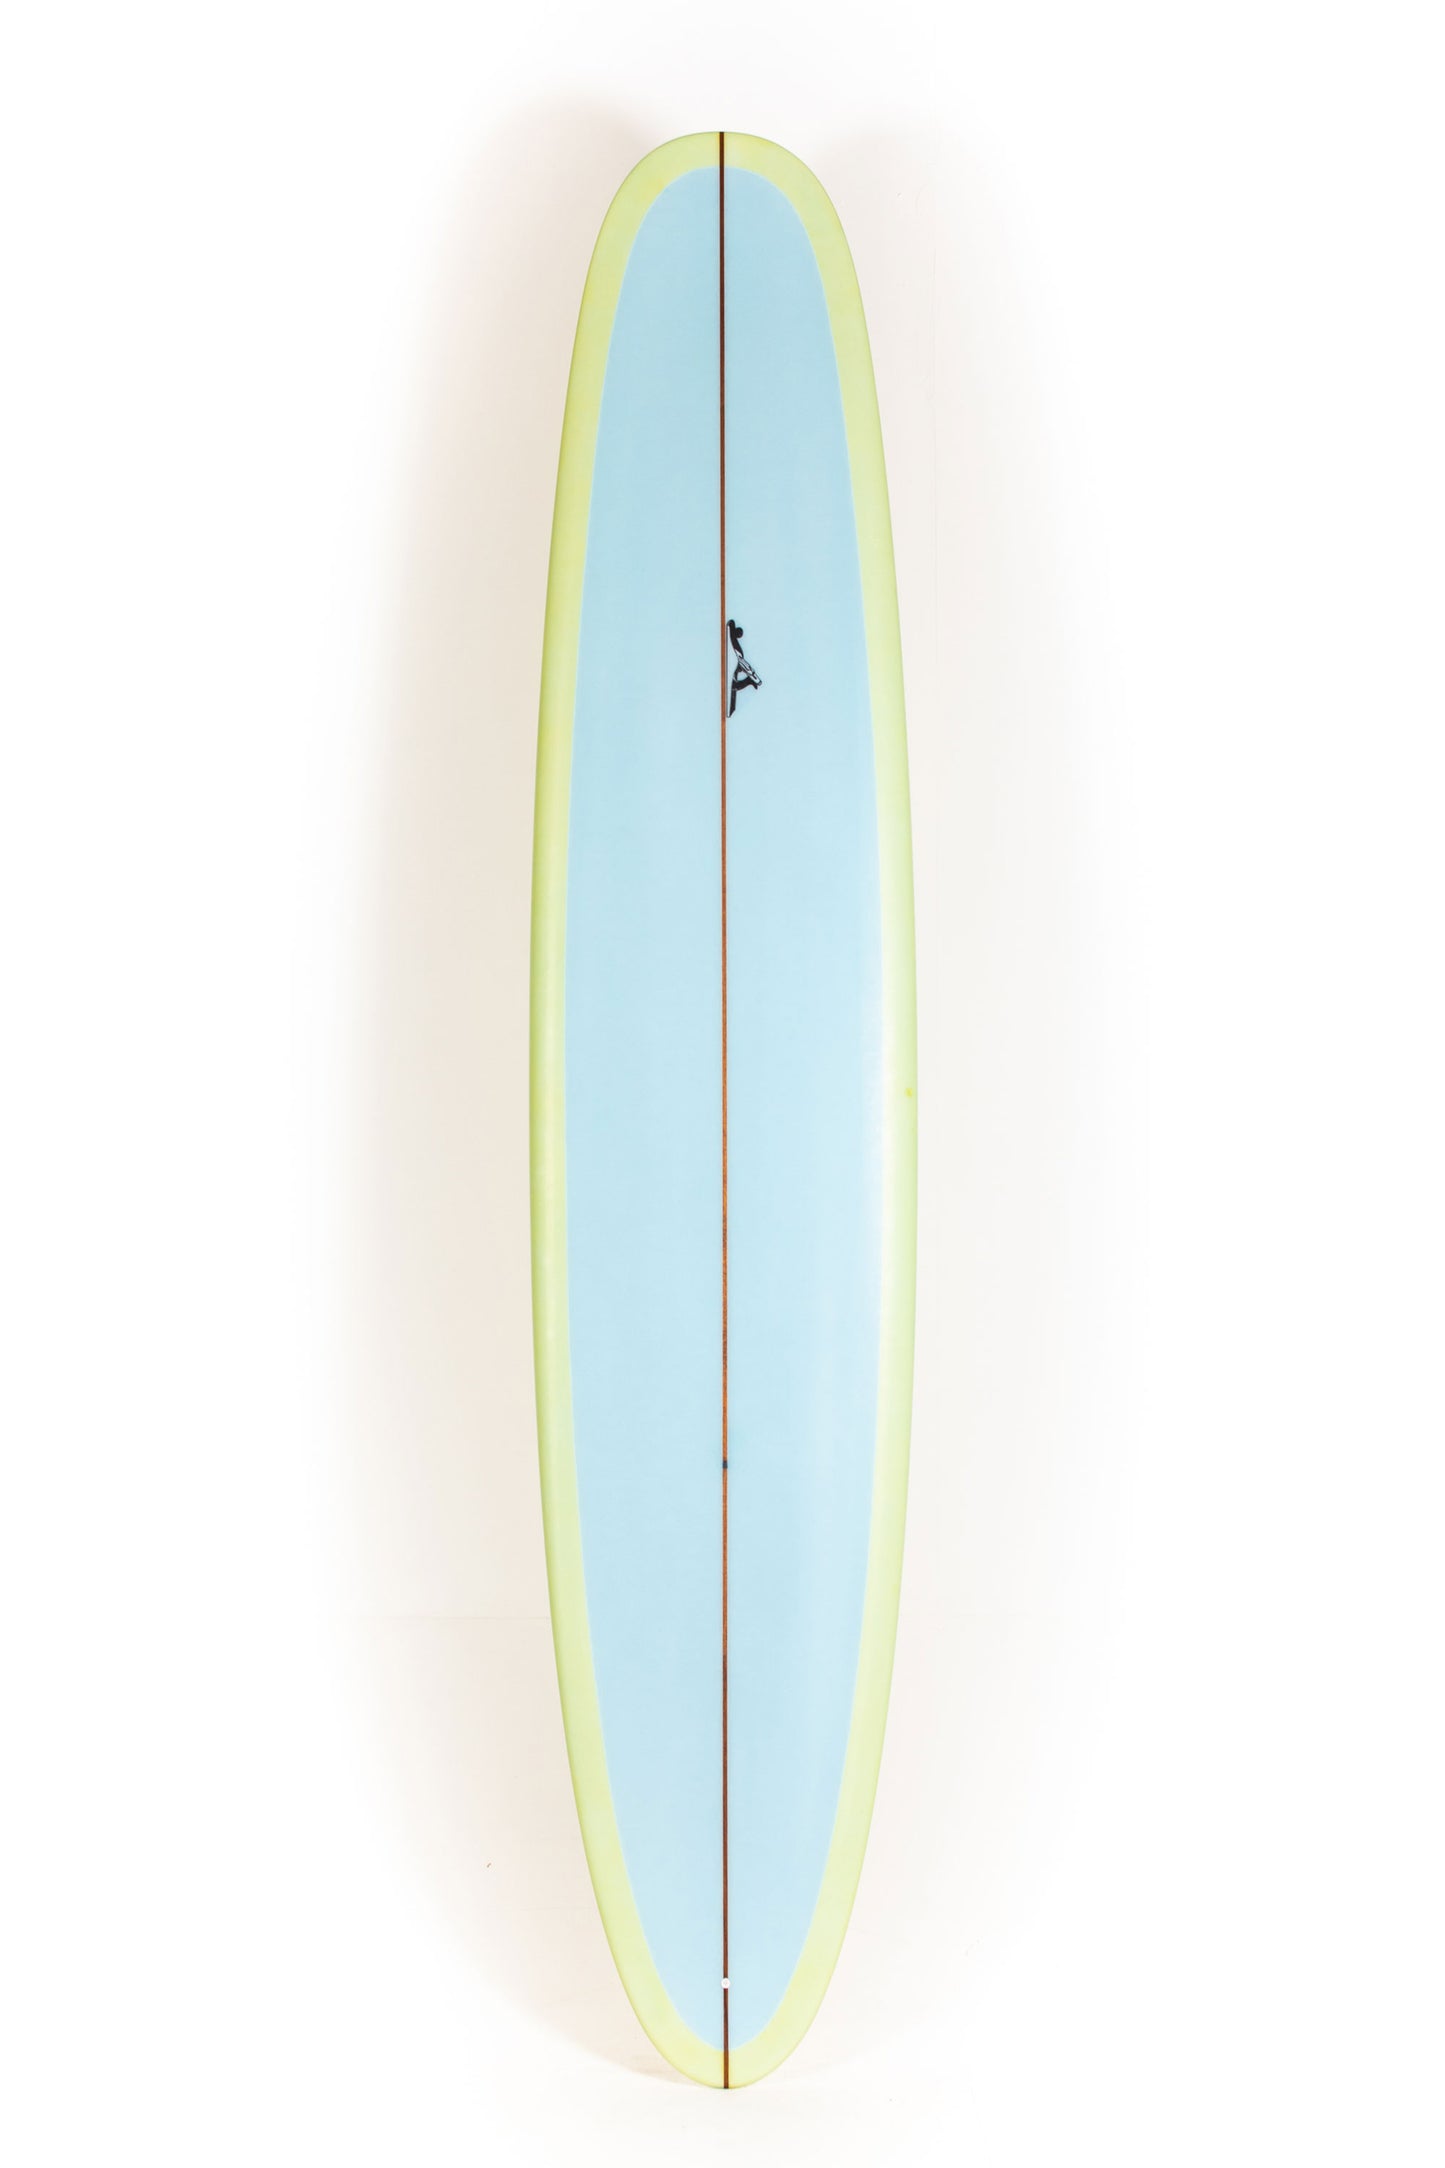 Pukas-Surf-Shop-Thomas-Surfboards-The-Wizl